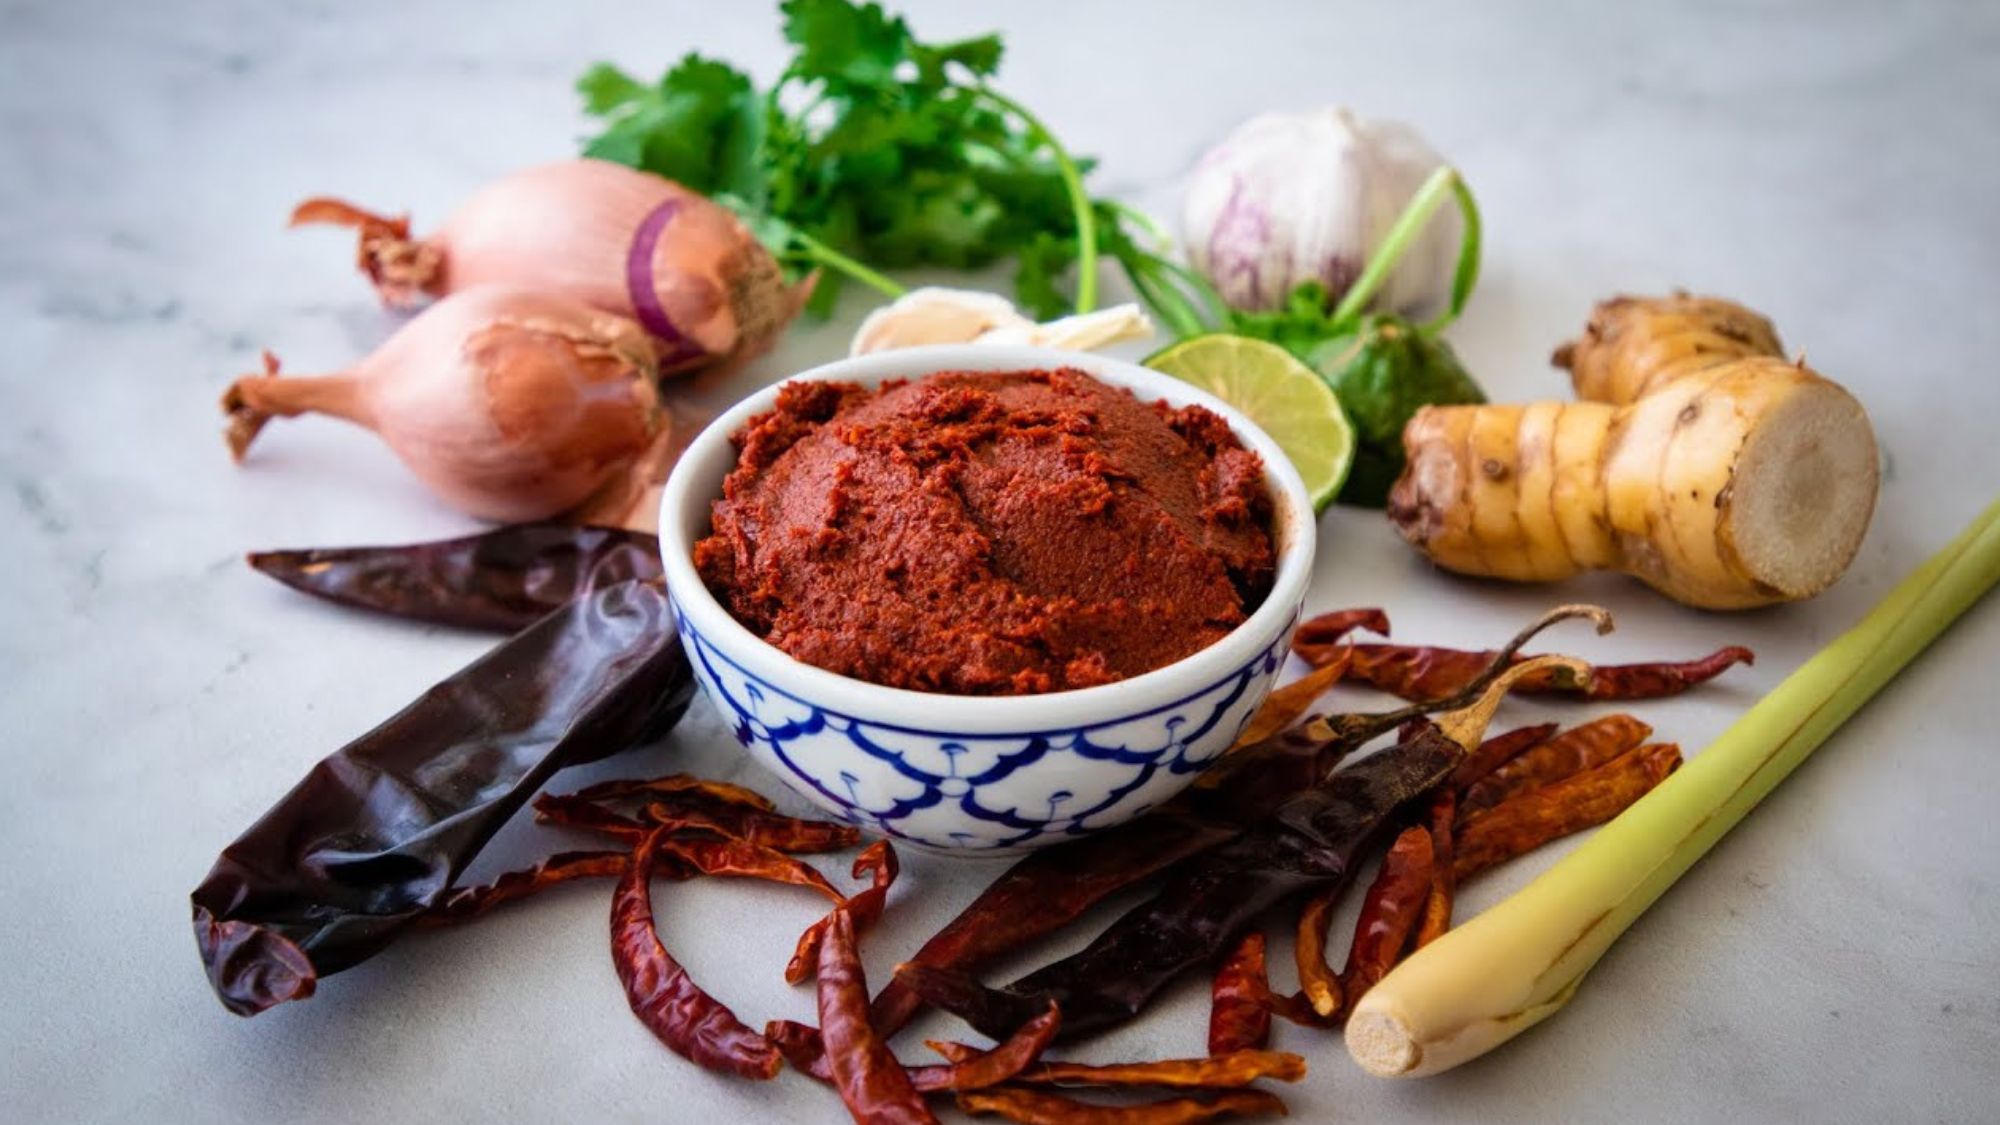 How to Make Gluten-Free Red Curry Paste?